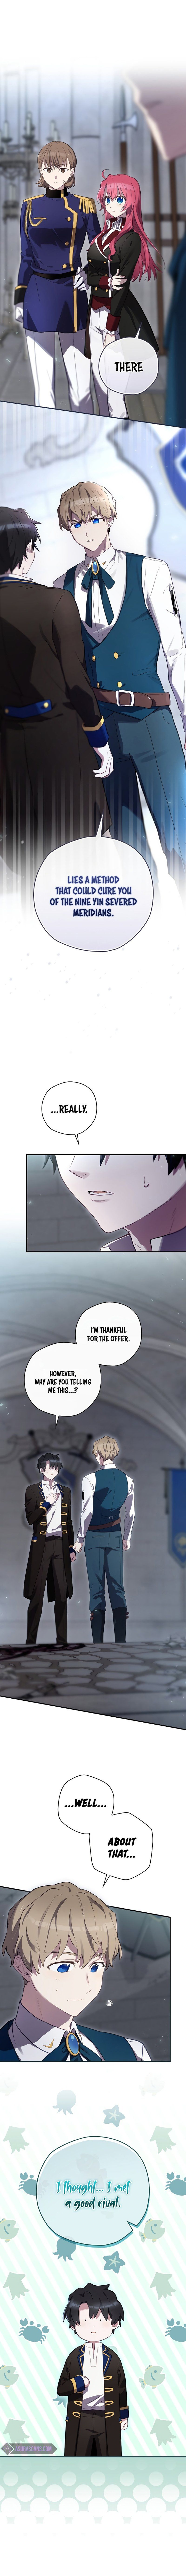 Ending Maker Chapter 35 page 2